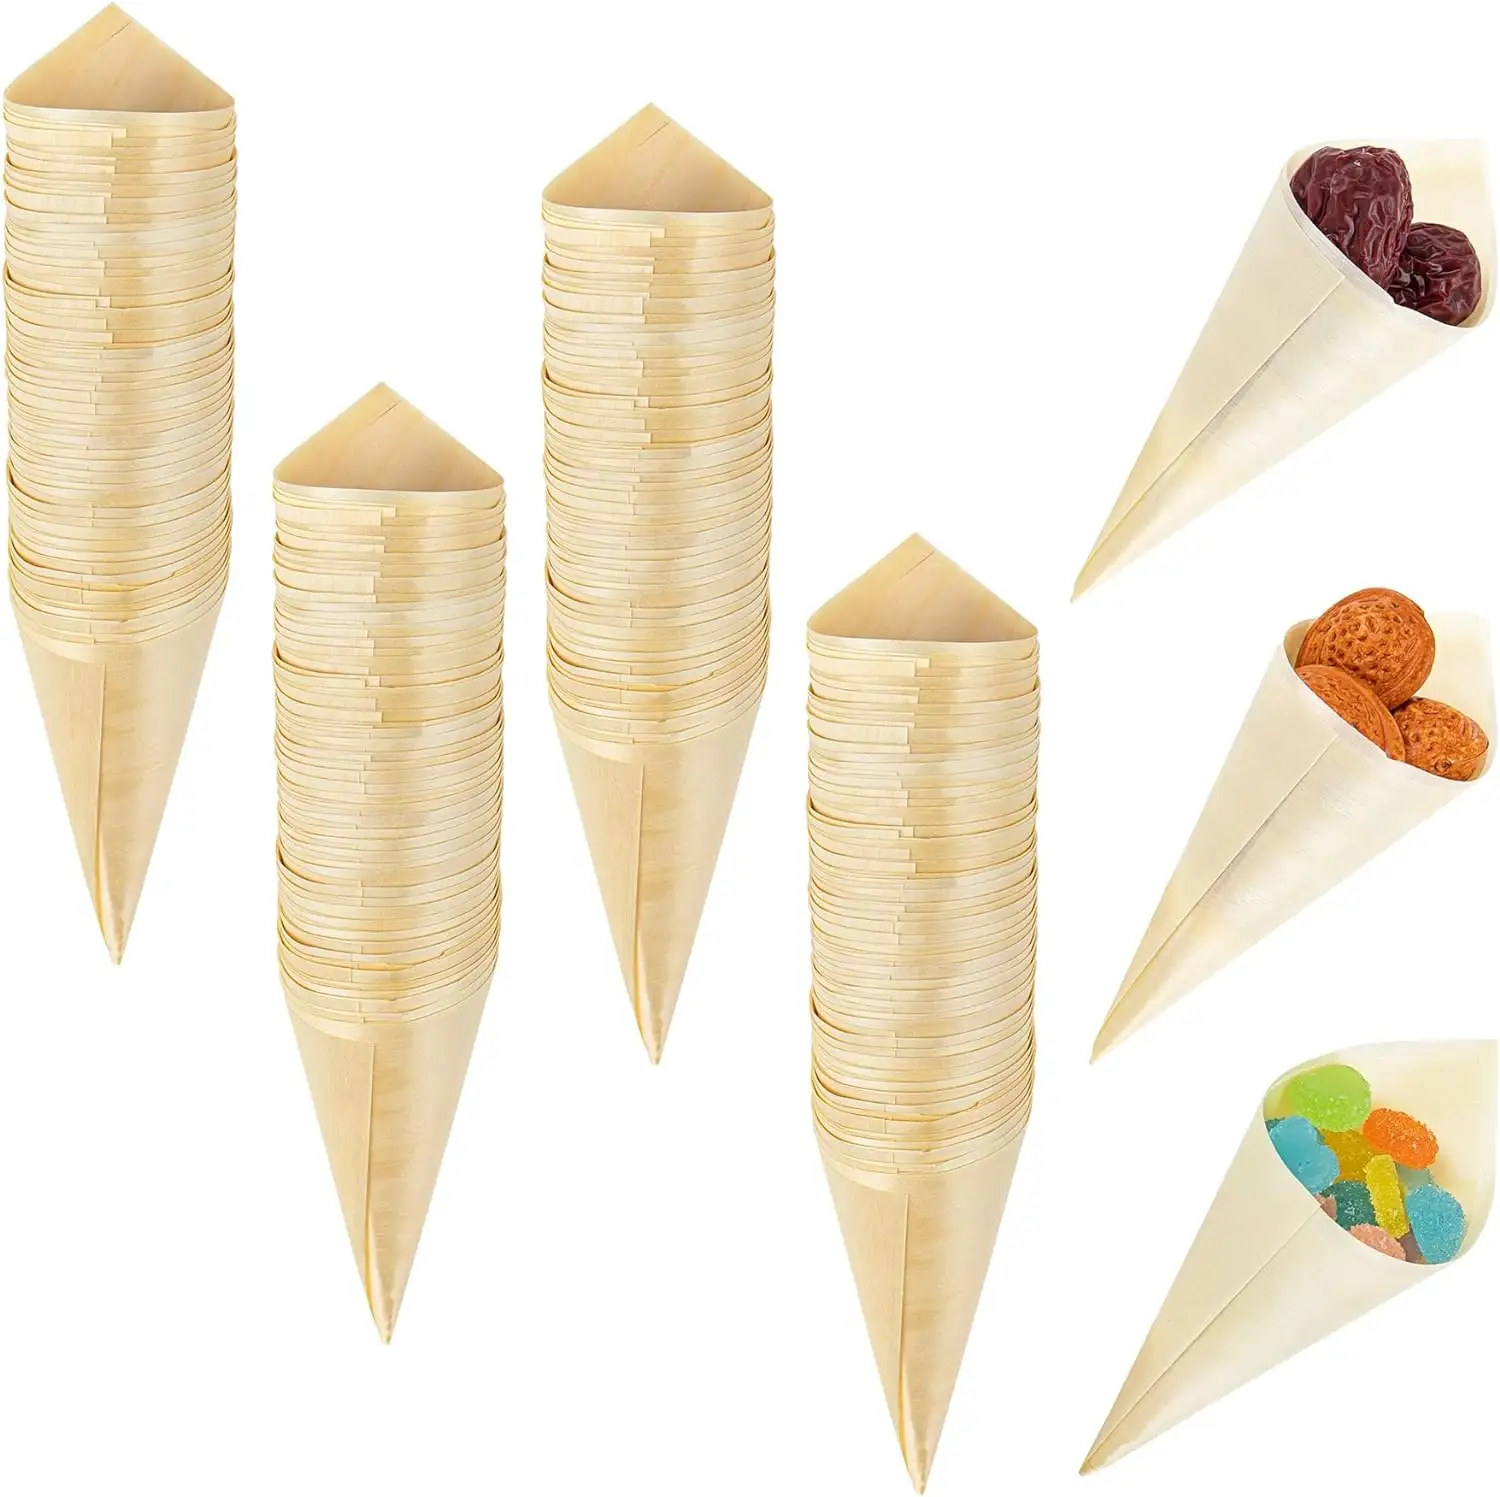 Disposable Wooden Cones Serving Tasting Dessert Cone Appetizer Finger Food Ice Cream Holder For Food And Decoration Displays